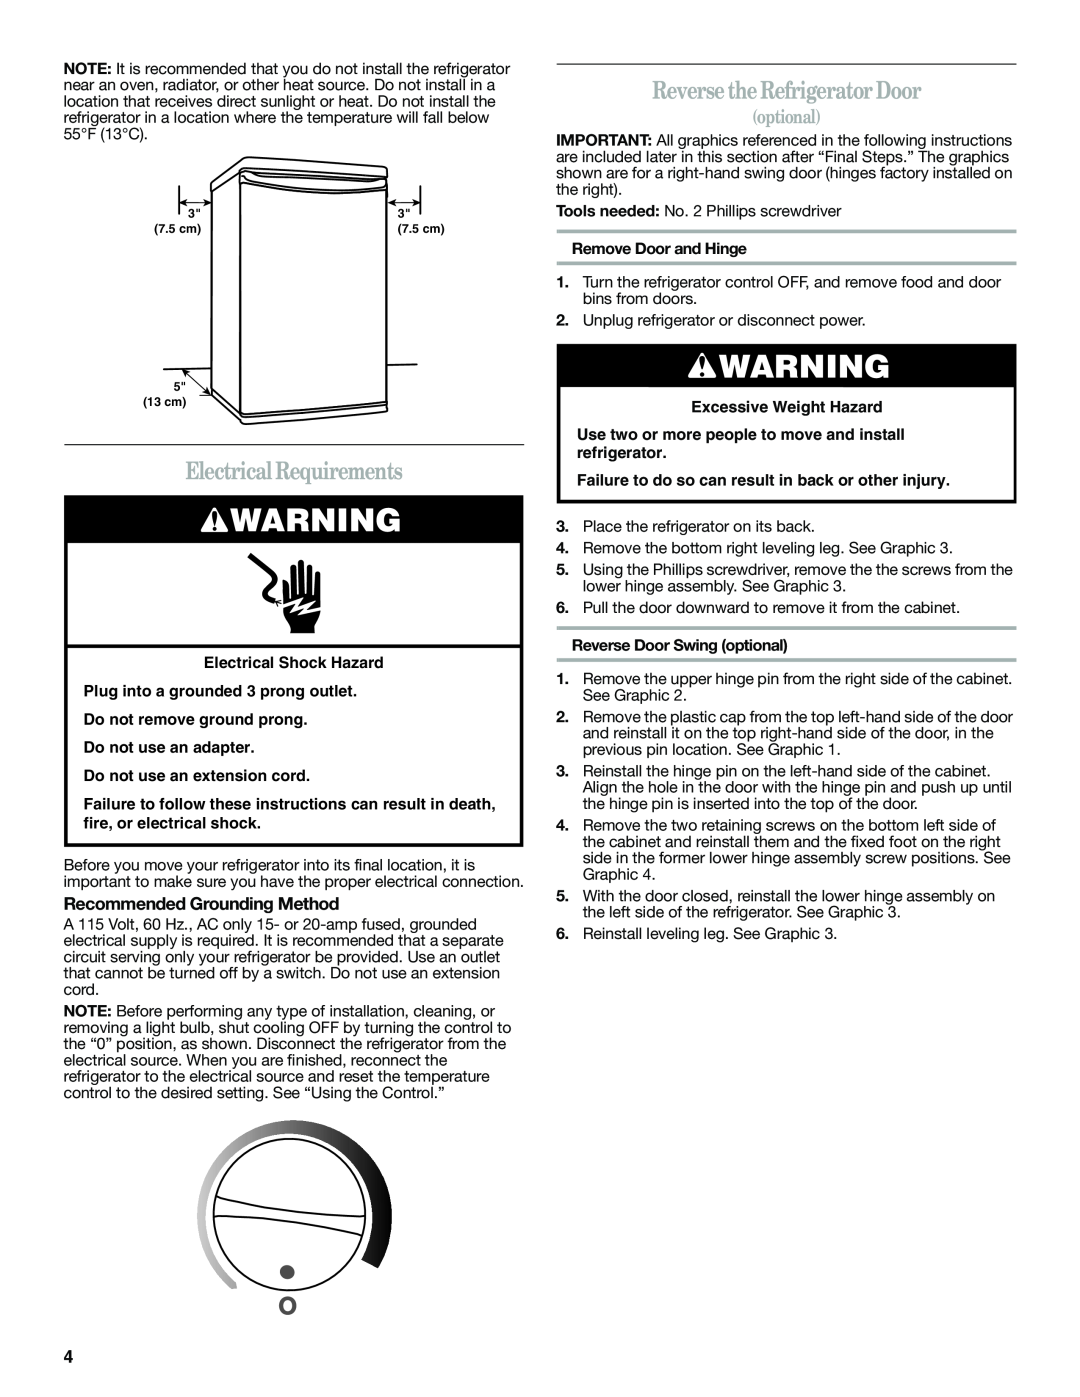 Whirlpool WAR488BSL manual Electrical Requirements, Reverse the Refrigerator Door, optional, Recommended Grounding Method 